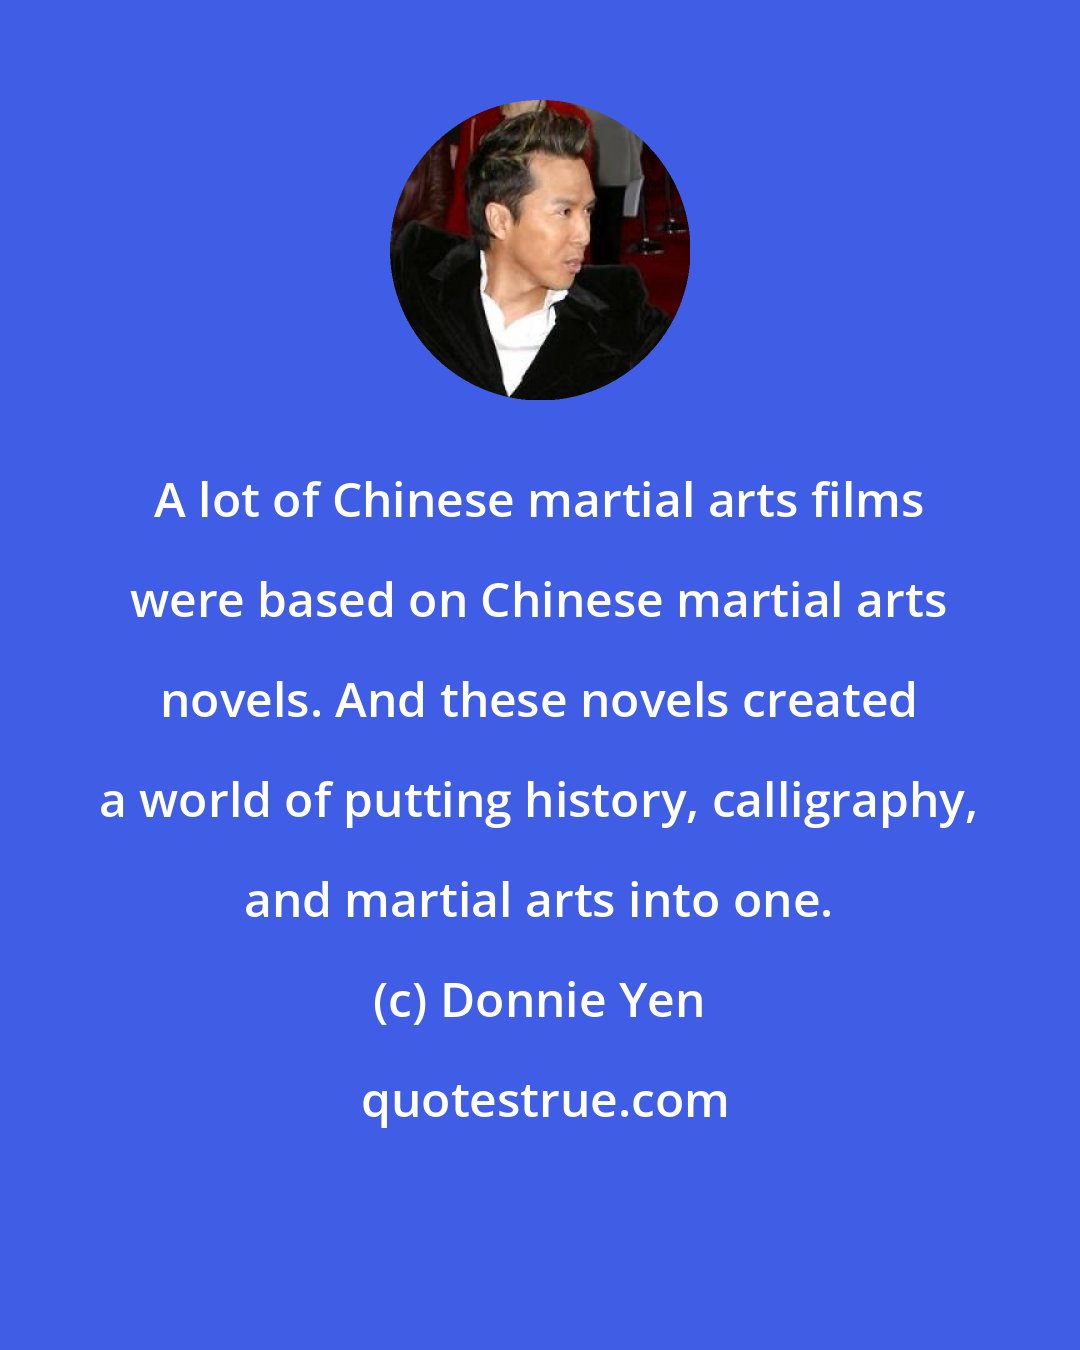 Donnie Yen: A lot of Chinese martial arts films were based on Chinese martial arts novels. And these novels created a world of putting history, calligraphy, and martial arts into one.